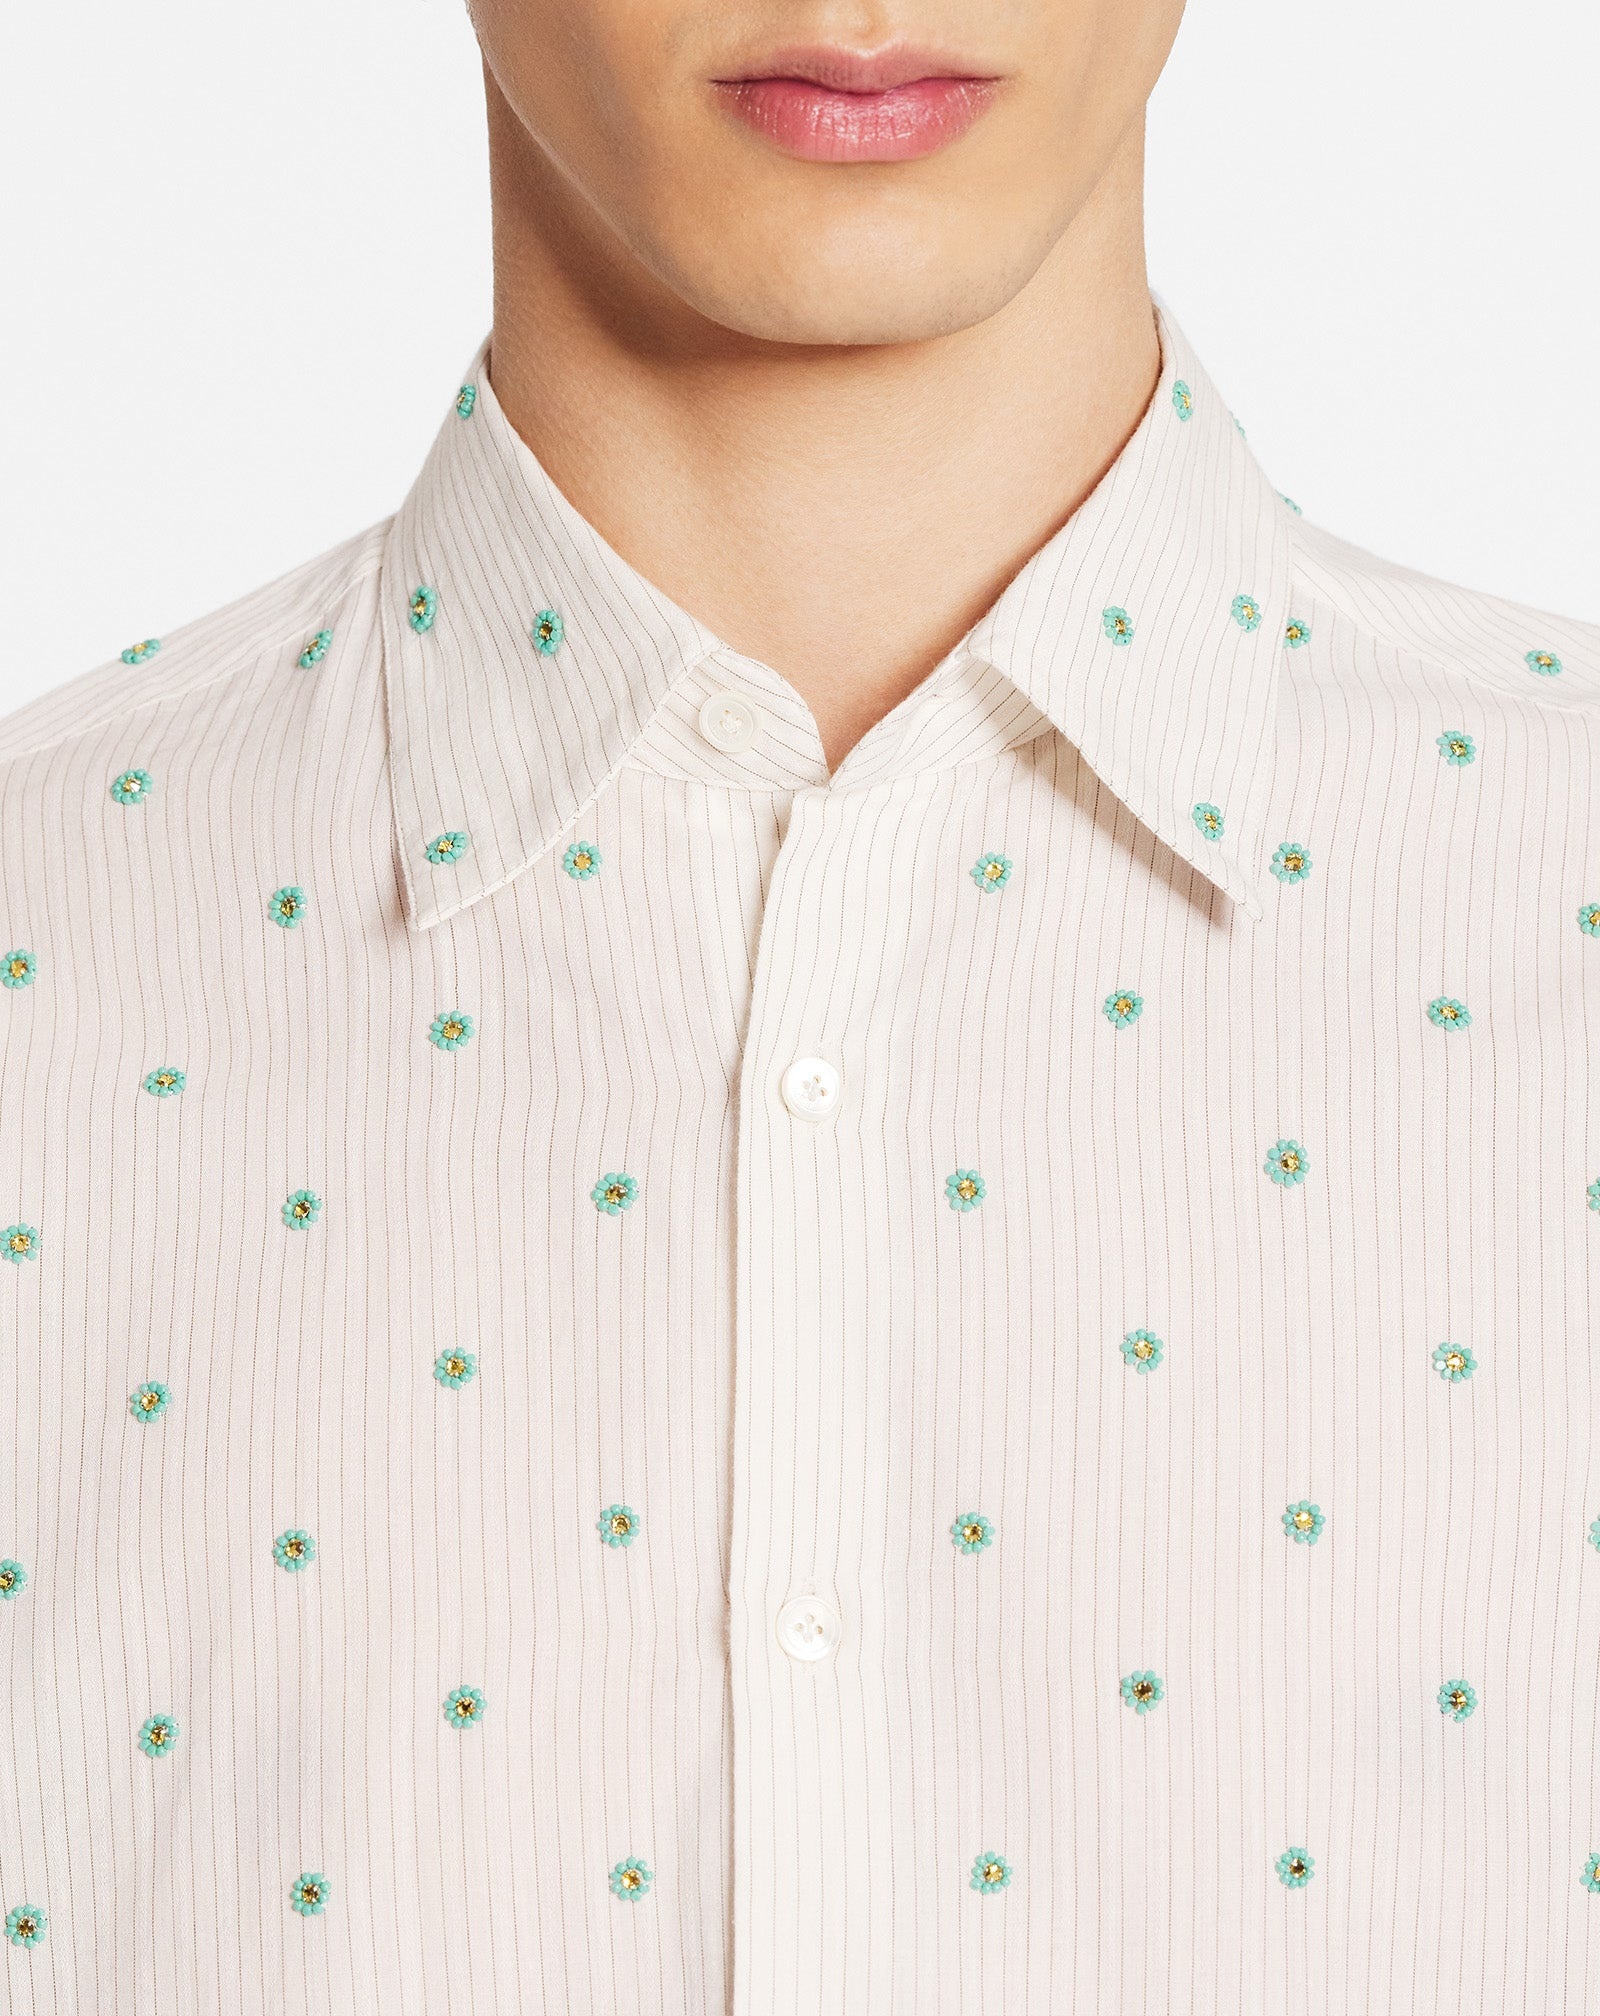 EMBROIDERED CLASSIC SHIRT - 5